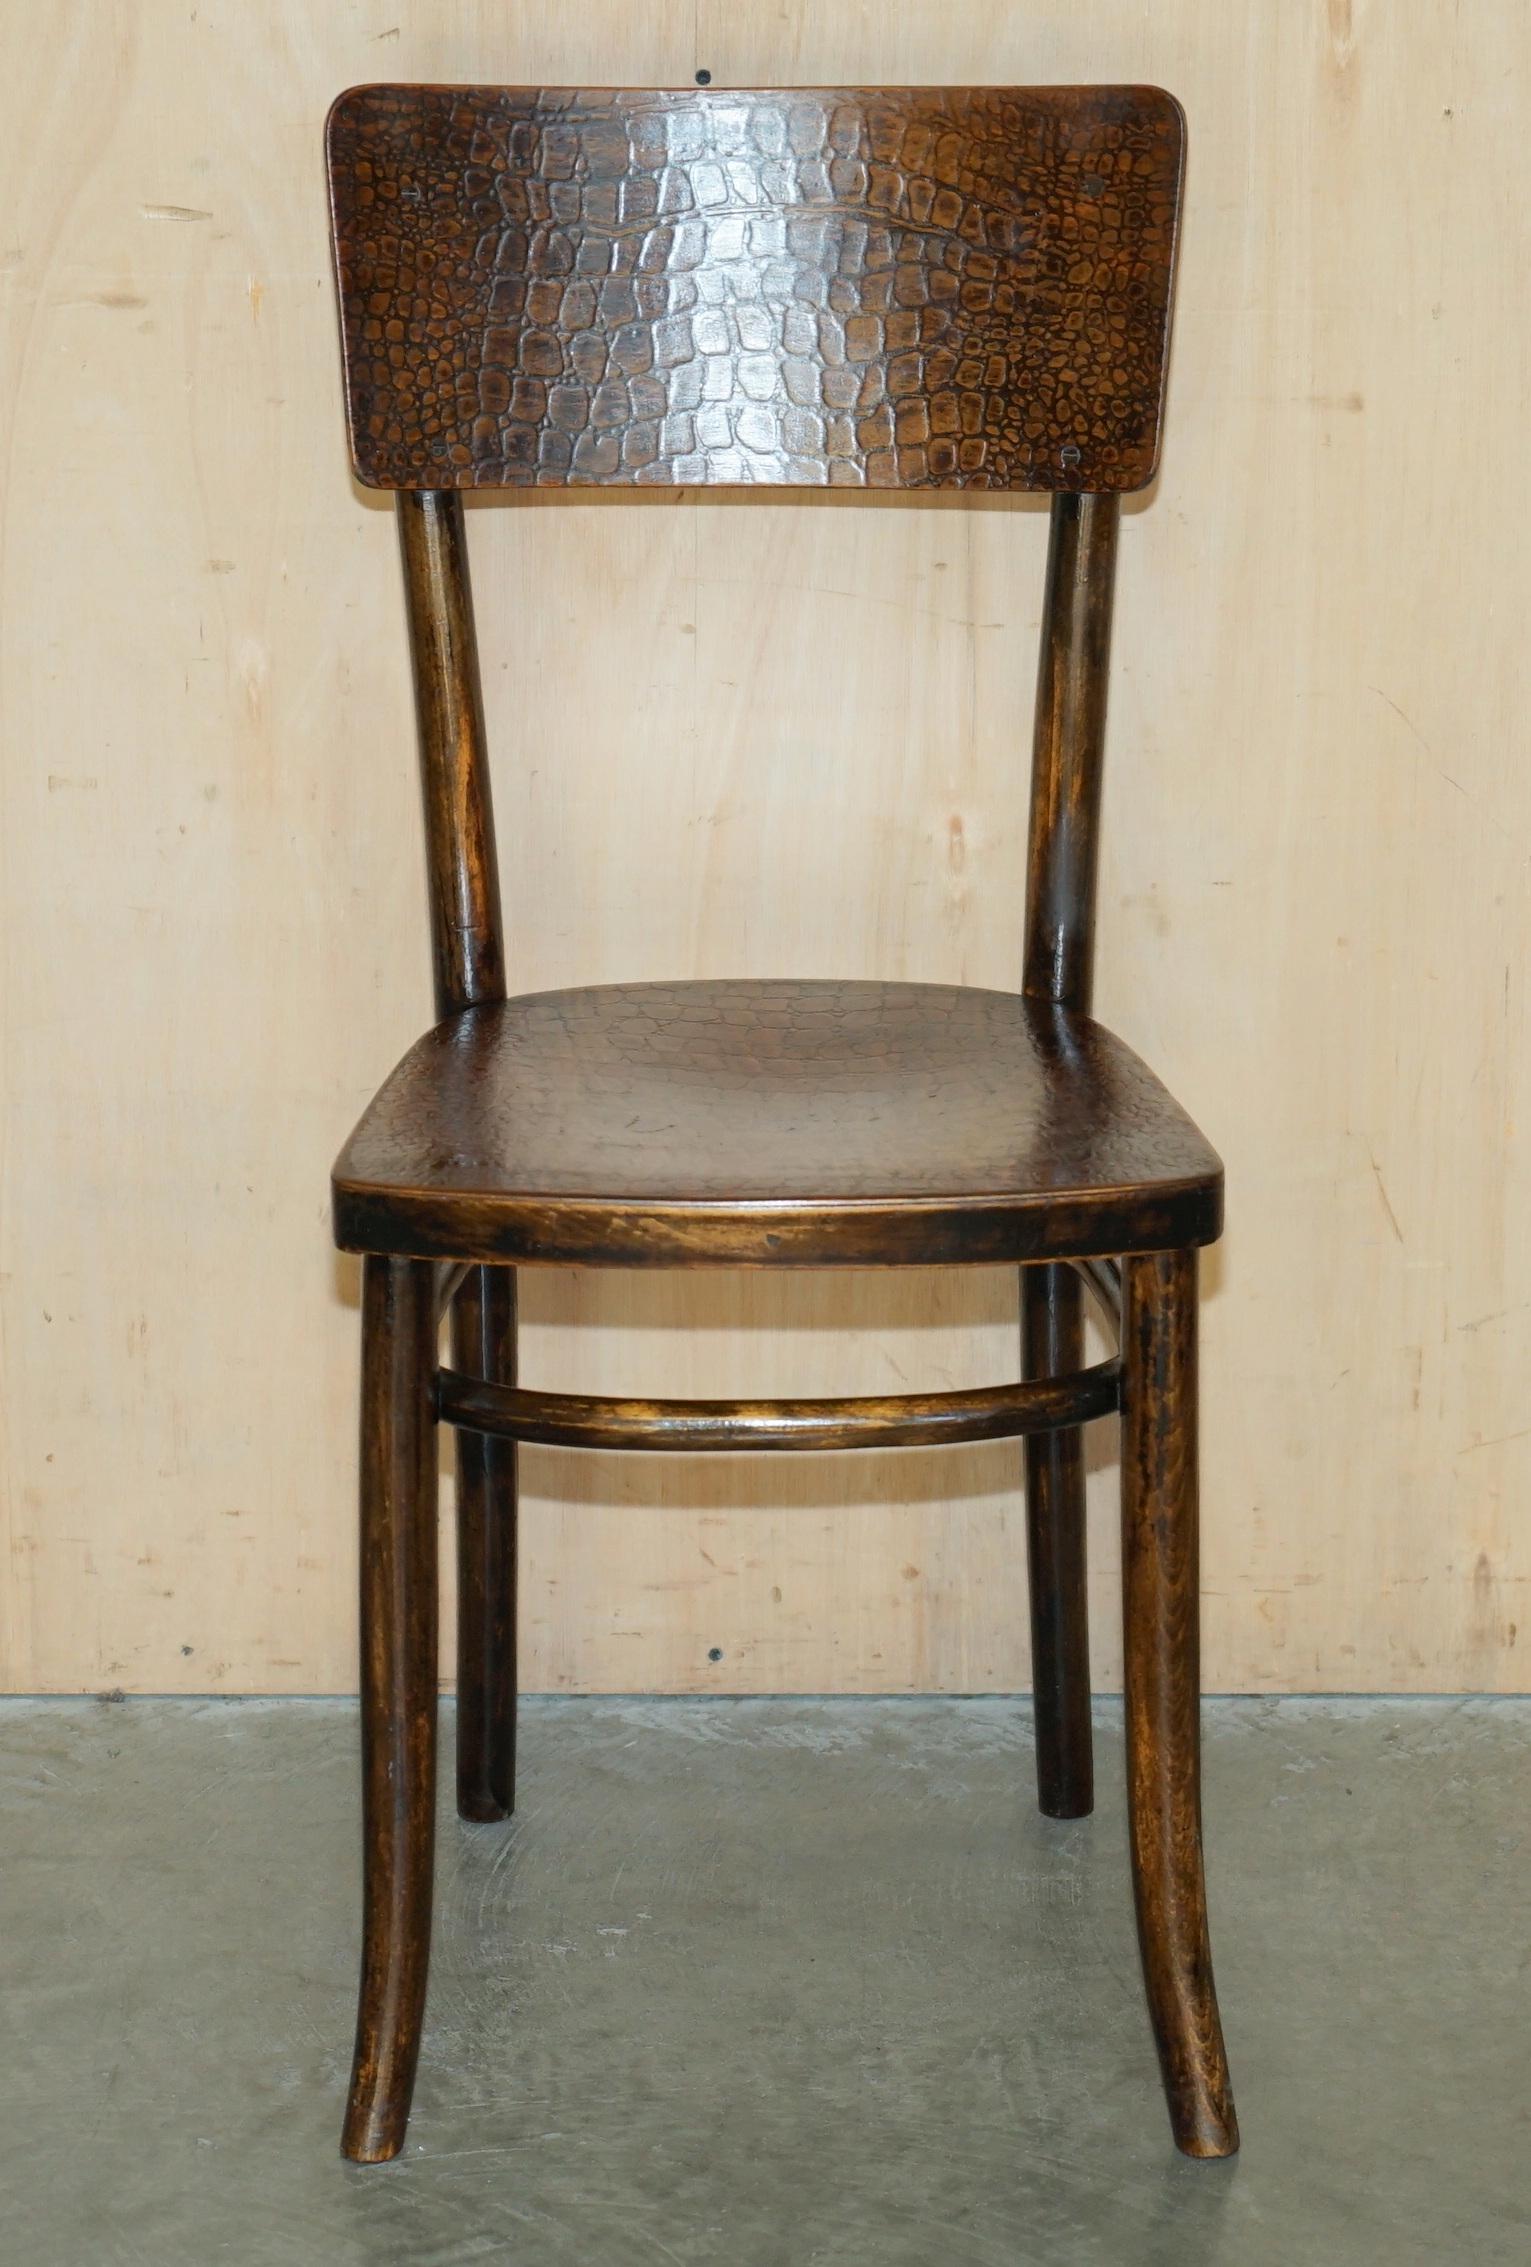 FOUR FiNE ANTIQUE THONET CROCODILE ALLIGATOR CARVED WOOD PATINA DINING CHAIRS 4 For Sale 8